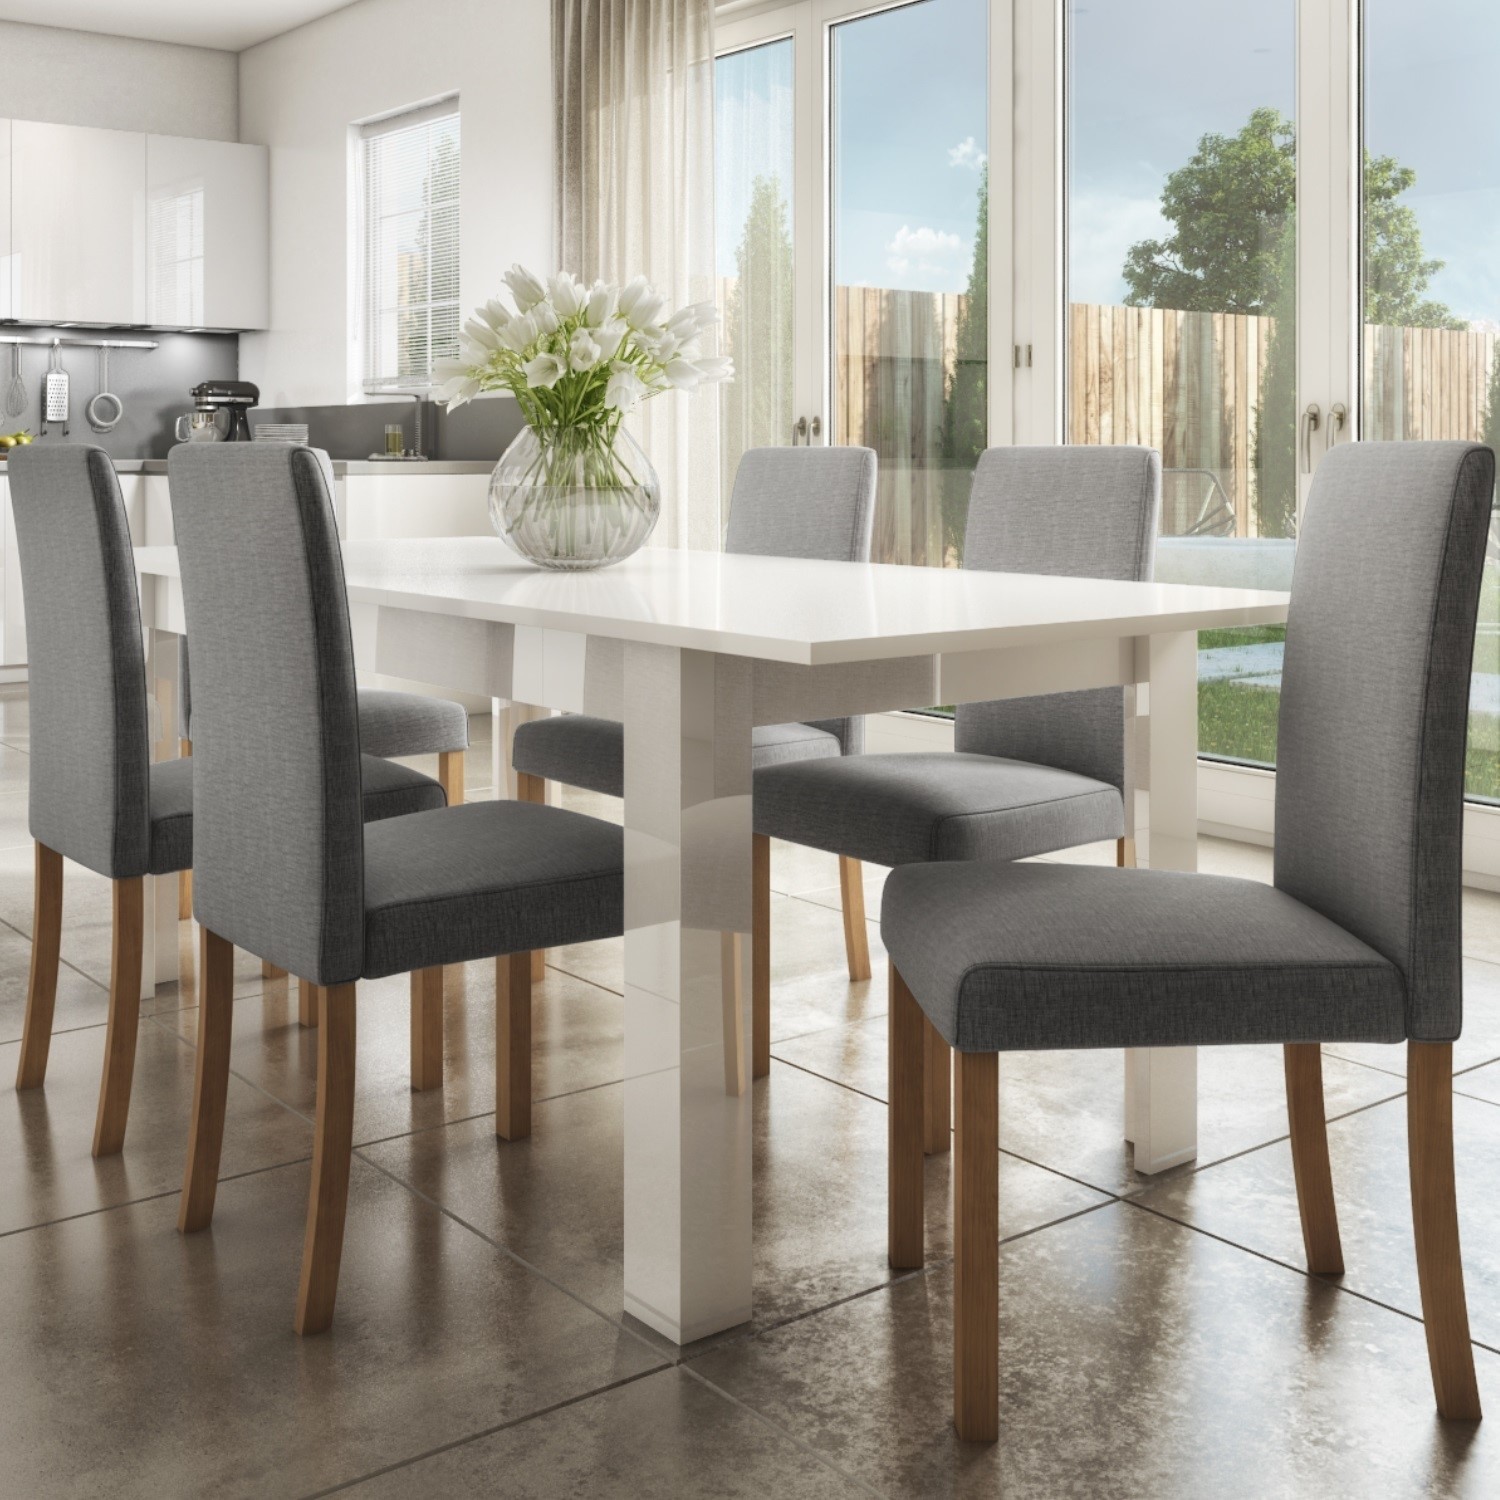 Extendable Dining Table In White High Gloss With 6 Grey Chairs